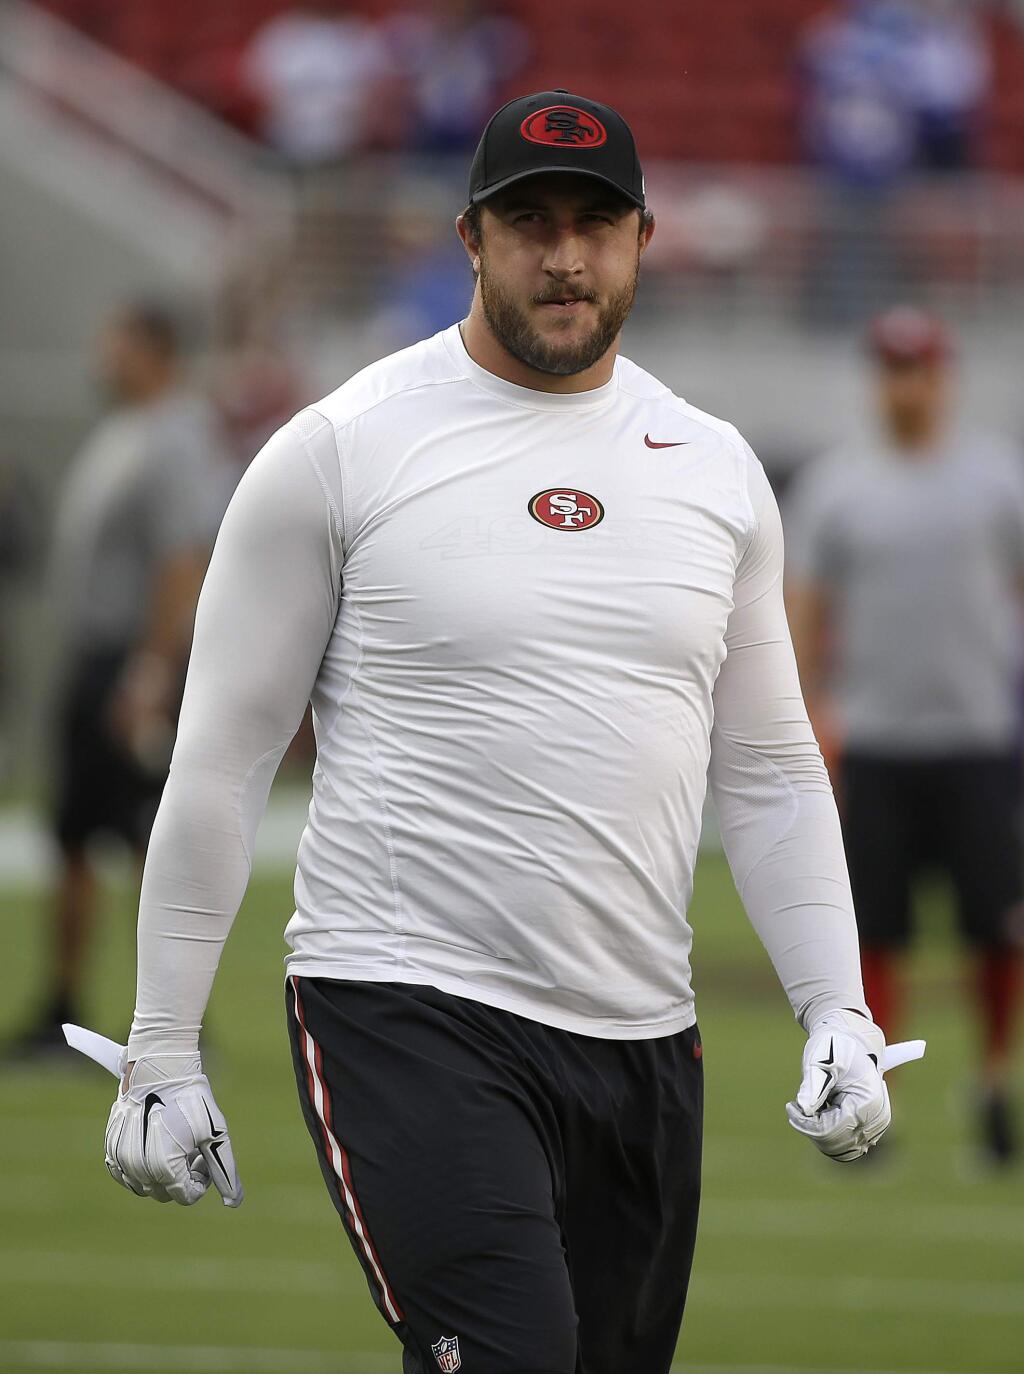 San Francisco 49ers offensive tackle Joe Staley warms up before a game against the Minnesota Vikings in Santa Clara, Monday, Sept. 14, 2015. (AP Photo/Eric Risberg)